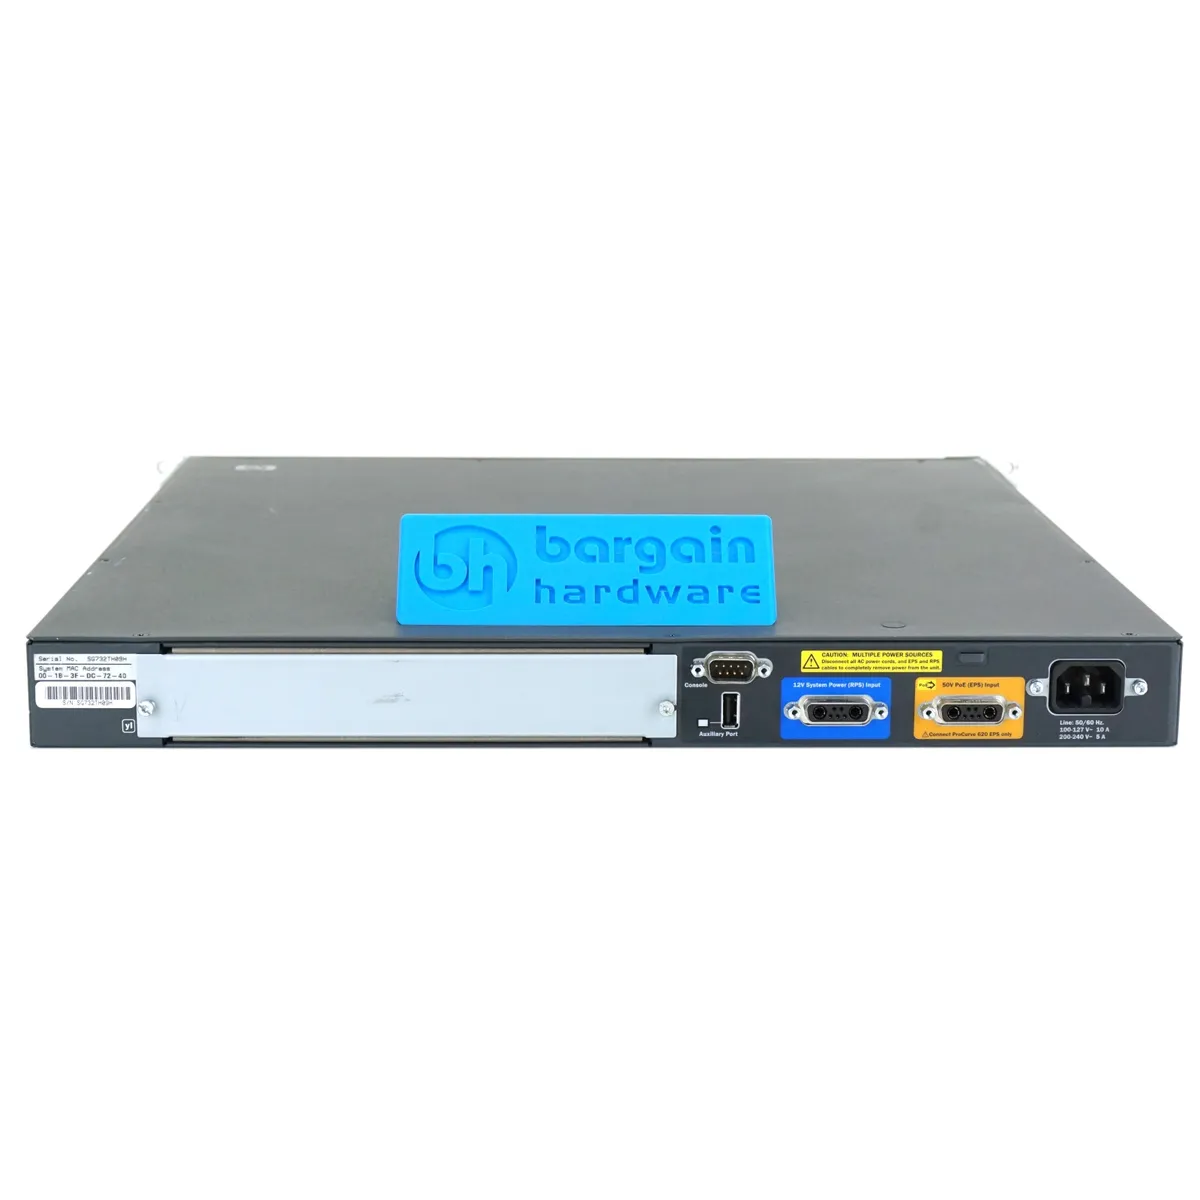 HP (J9311A) Pro-Curve 3500YL-48G-PoE+ - 48 RJ-45 Port PoE+ Switch -With Ears